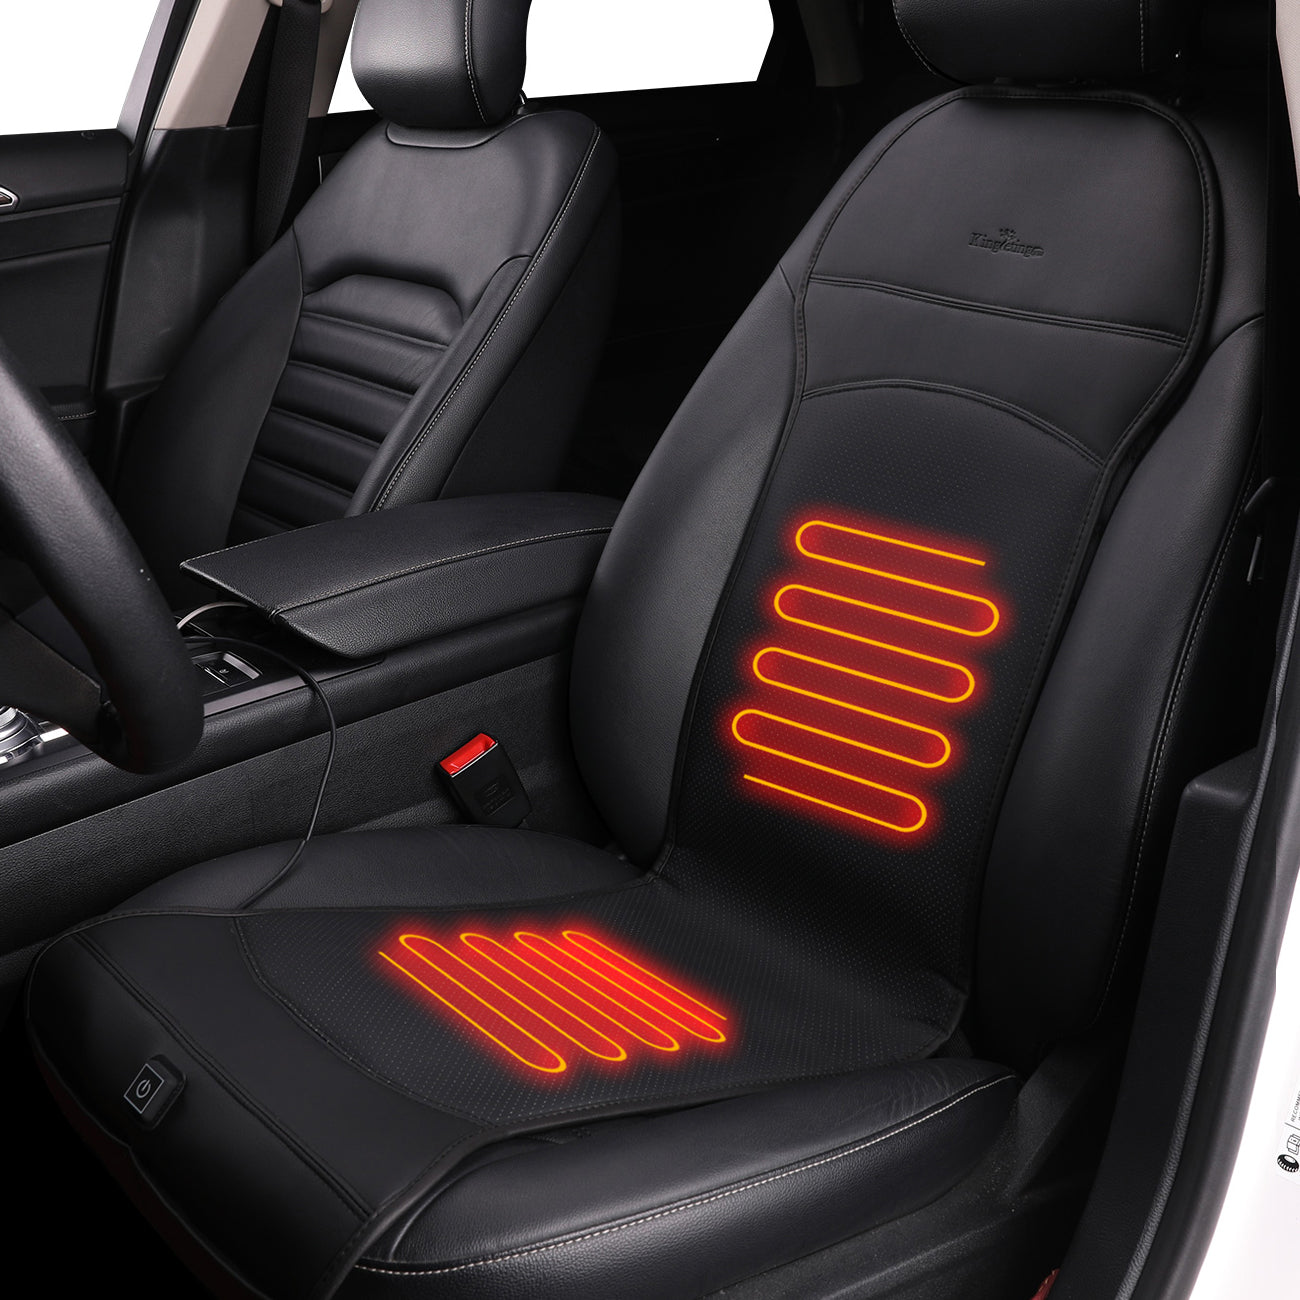 KINGLETING 12V Heated Seat Cushion with Intelligent Temperature Controller  and Timing Function (Black).